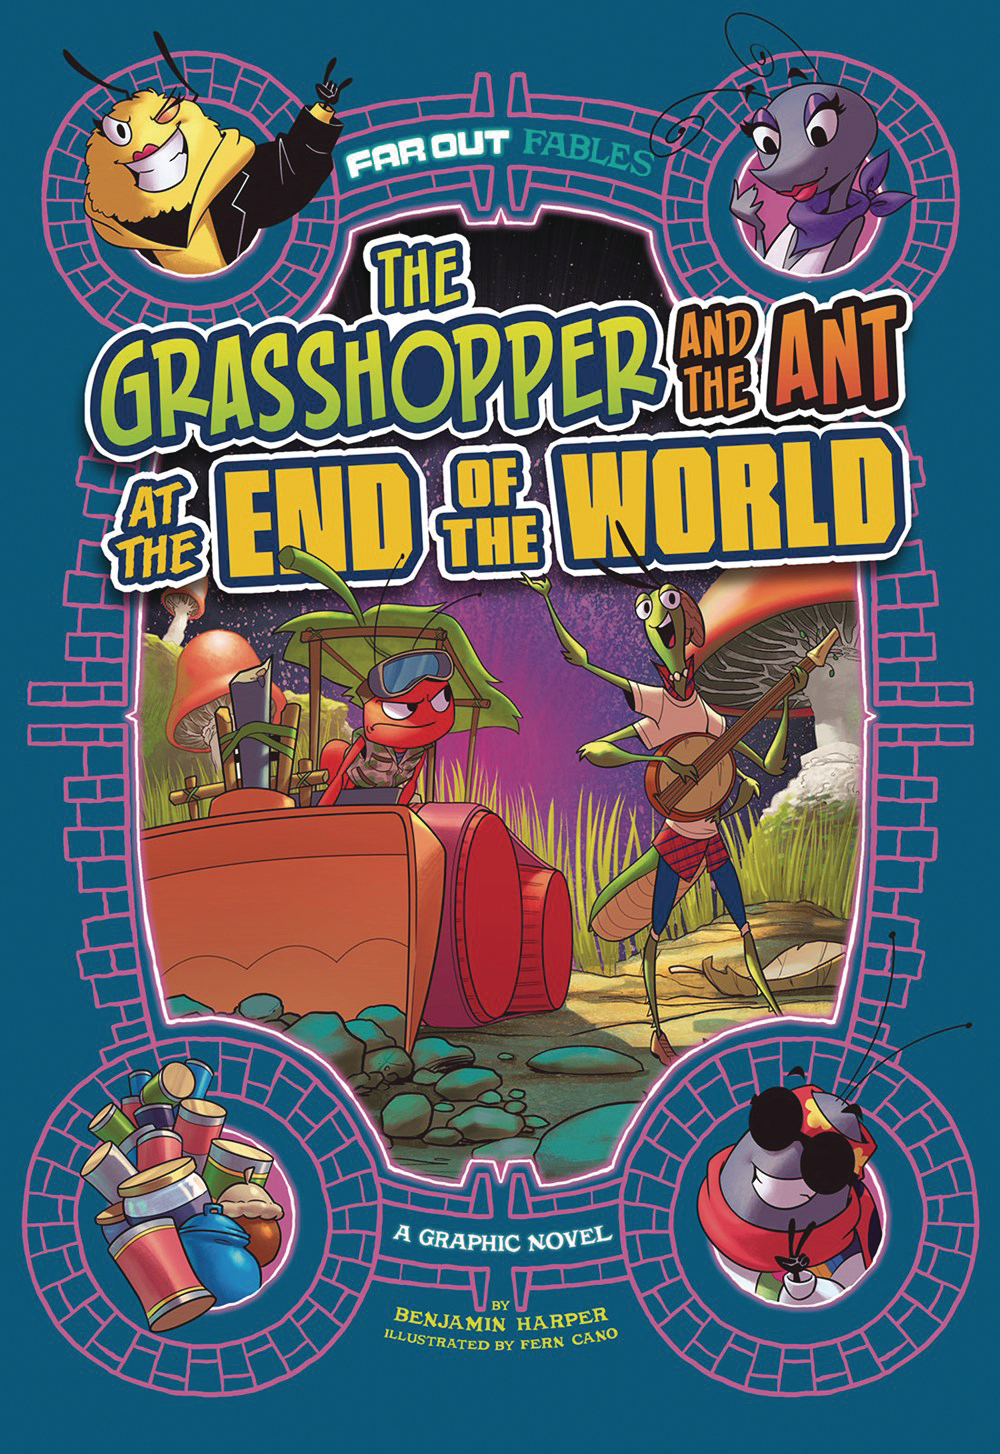 Far Out Fables Grasshopper & Ant At End of World Graphic Novel